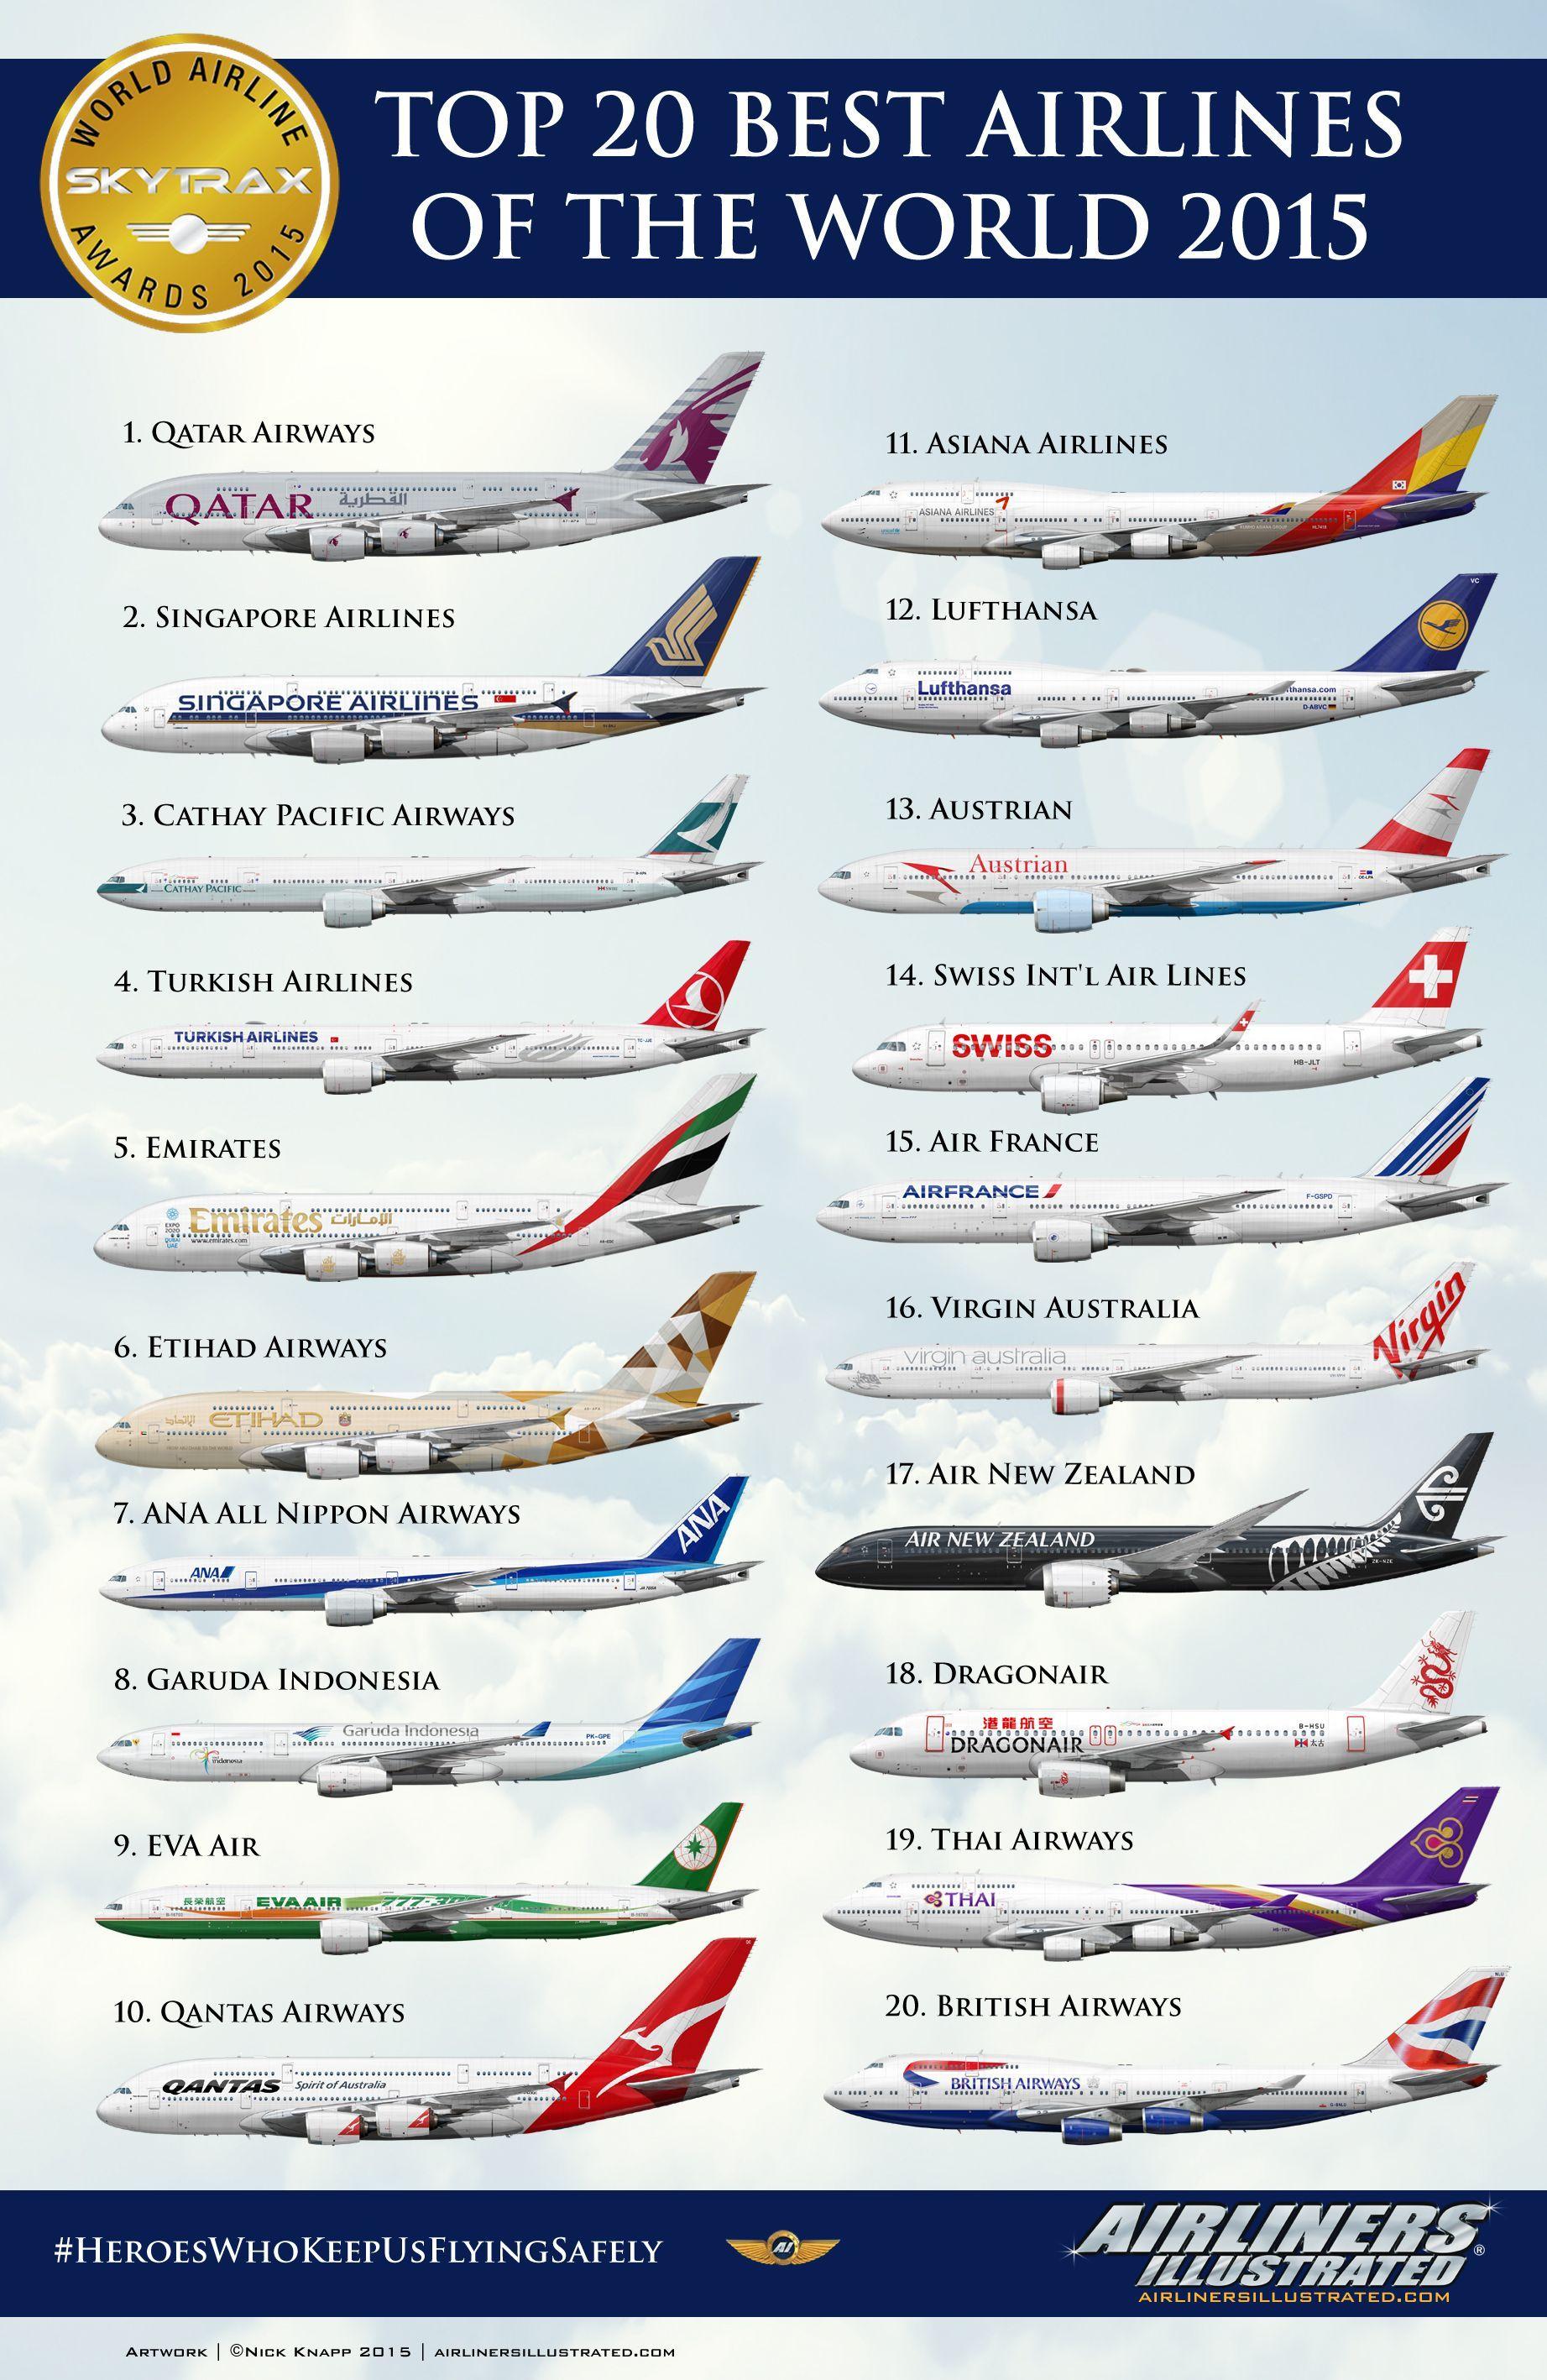 World's Top Airlines Logo - Top 20 Best Airlines of the World - Skytrax Awards 2015 | Flying ...